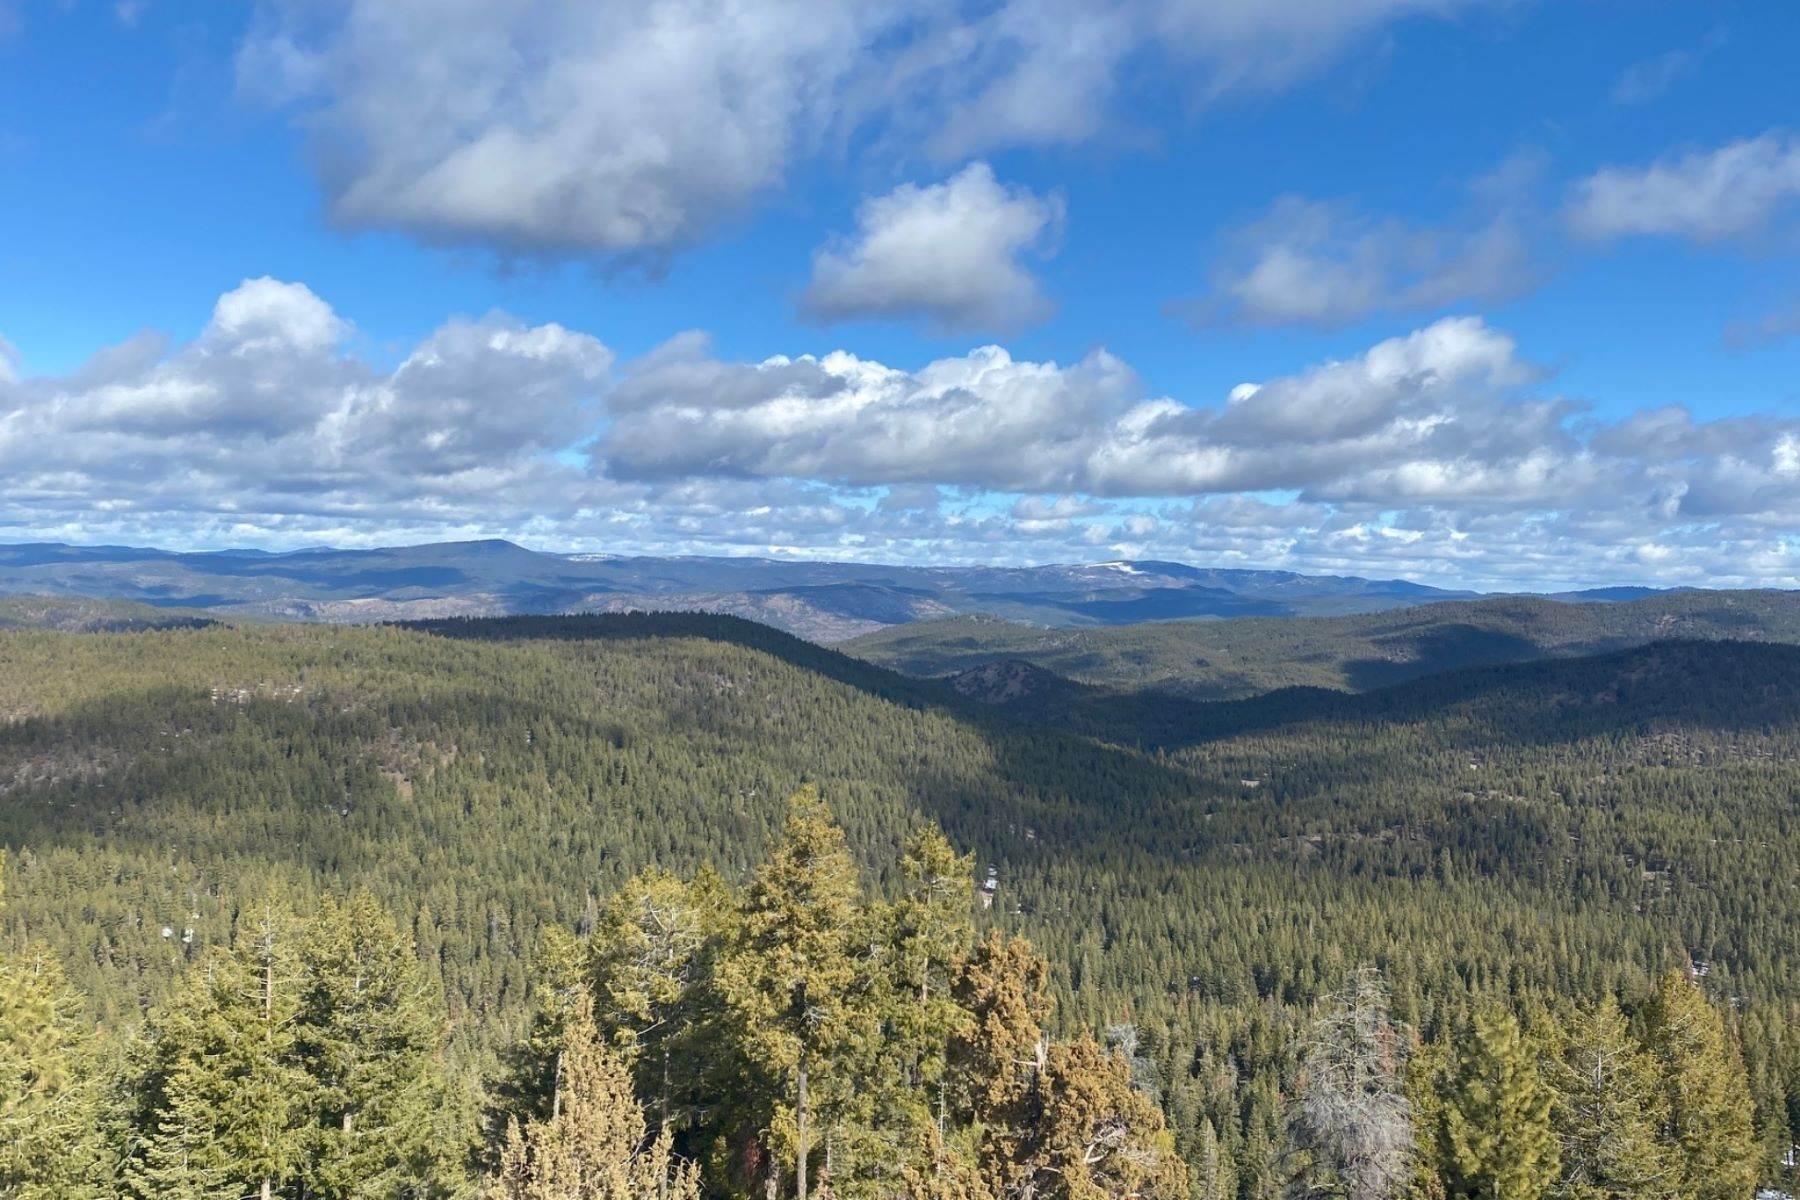 Farm and Ranch Properties for Sale at 27850 NE Old Wolf Creek Road Prineville, OR 97754 27850 NE Old Wolf Creek Road Prineville, Oregon 97754 United States